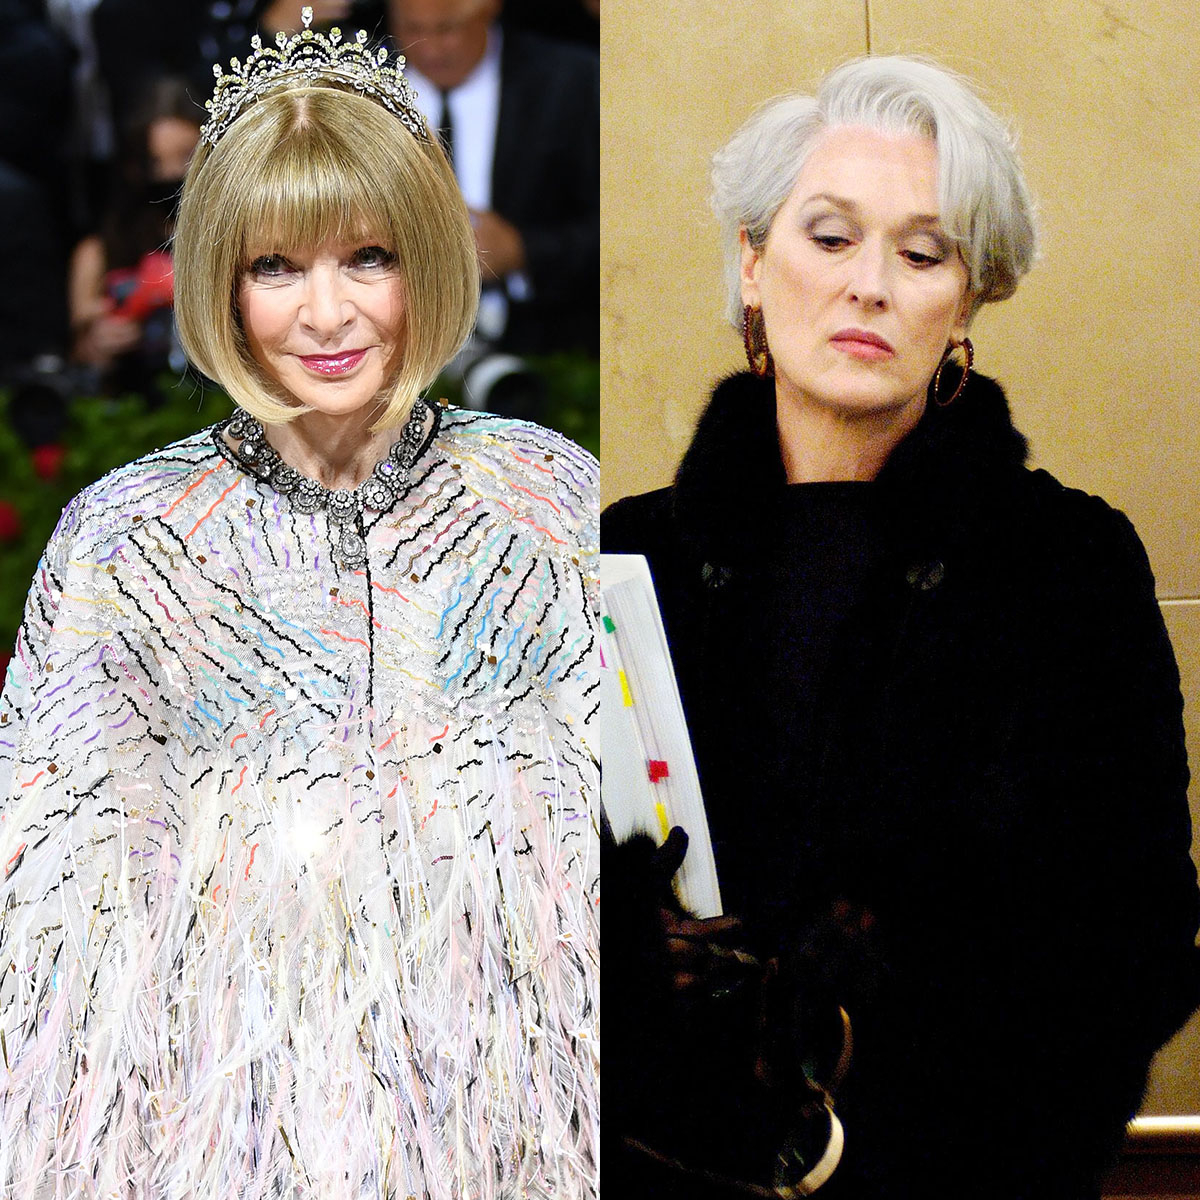 André Leon Talley on What Devil Wears Prada Got Wrong About Anna